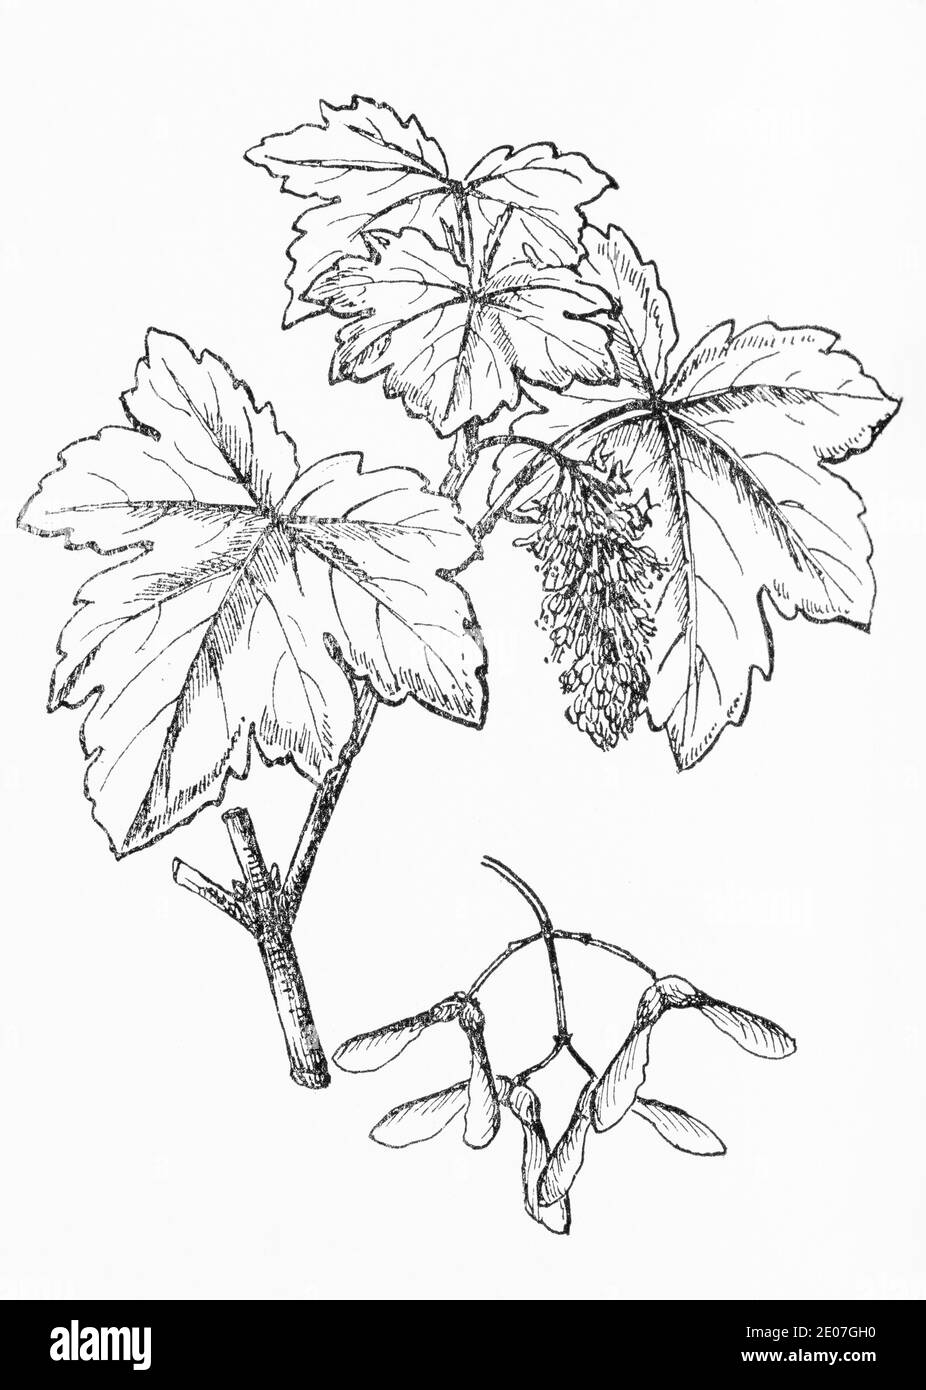 Old botanical illustration engraving of Sycamore / Acer pseudoplatanus. Traditional medicinal herbal plant. See Notes Stock Photo